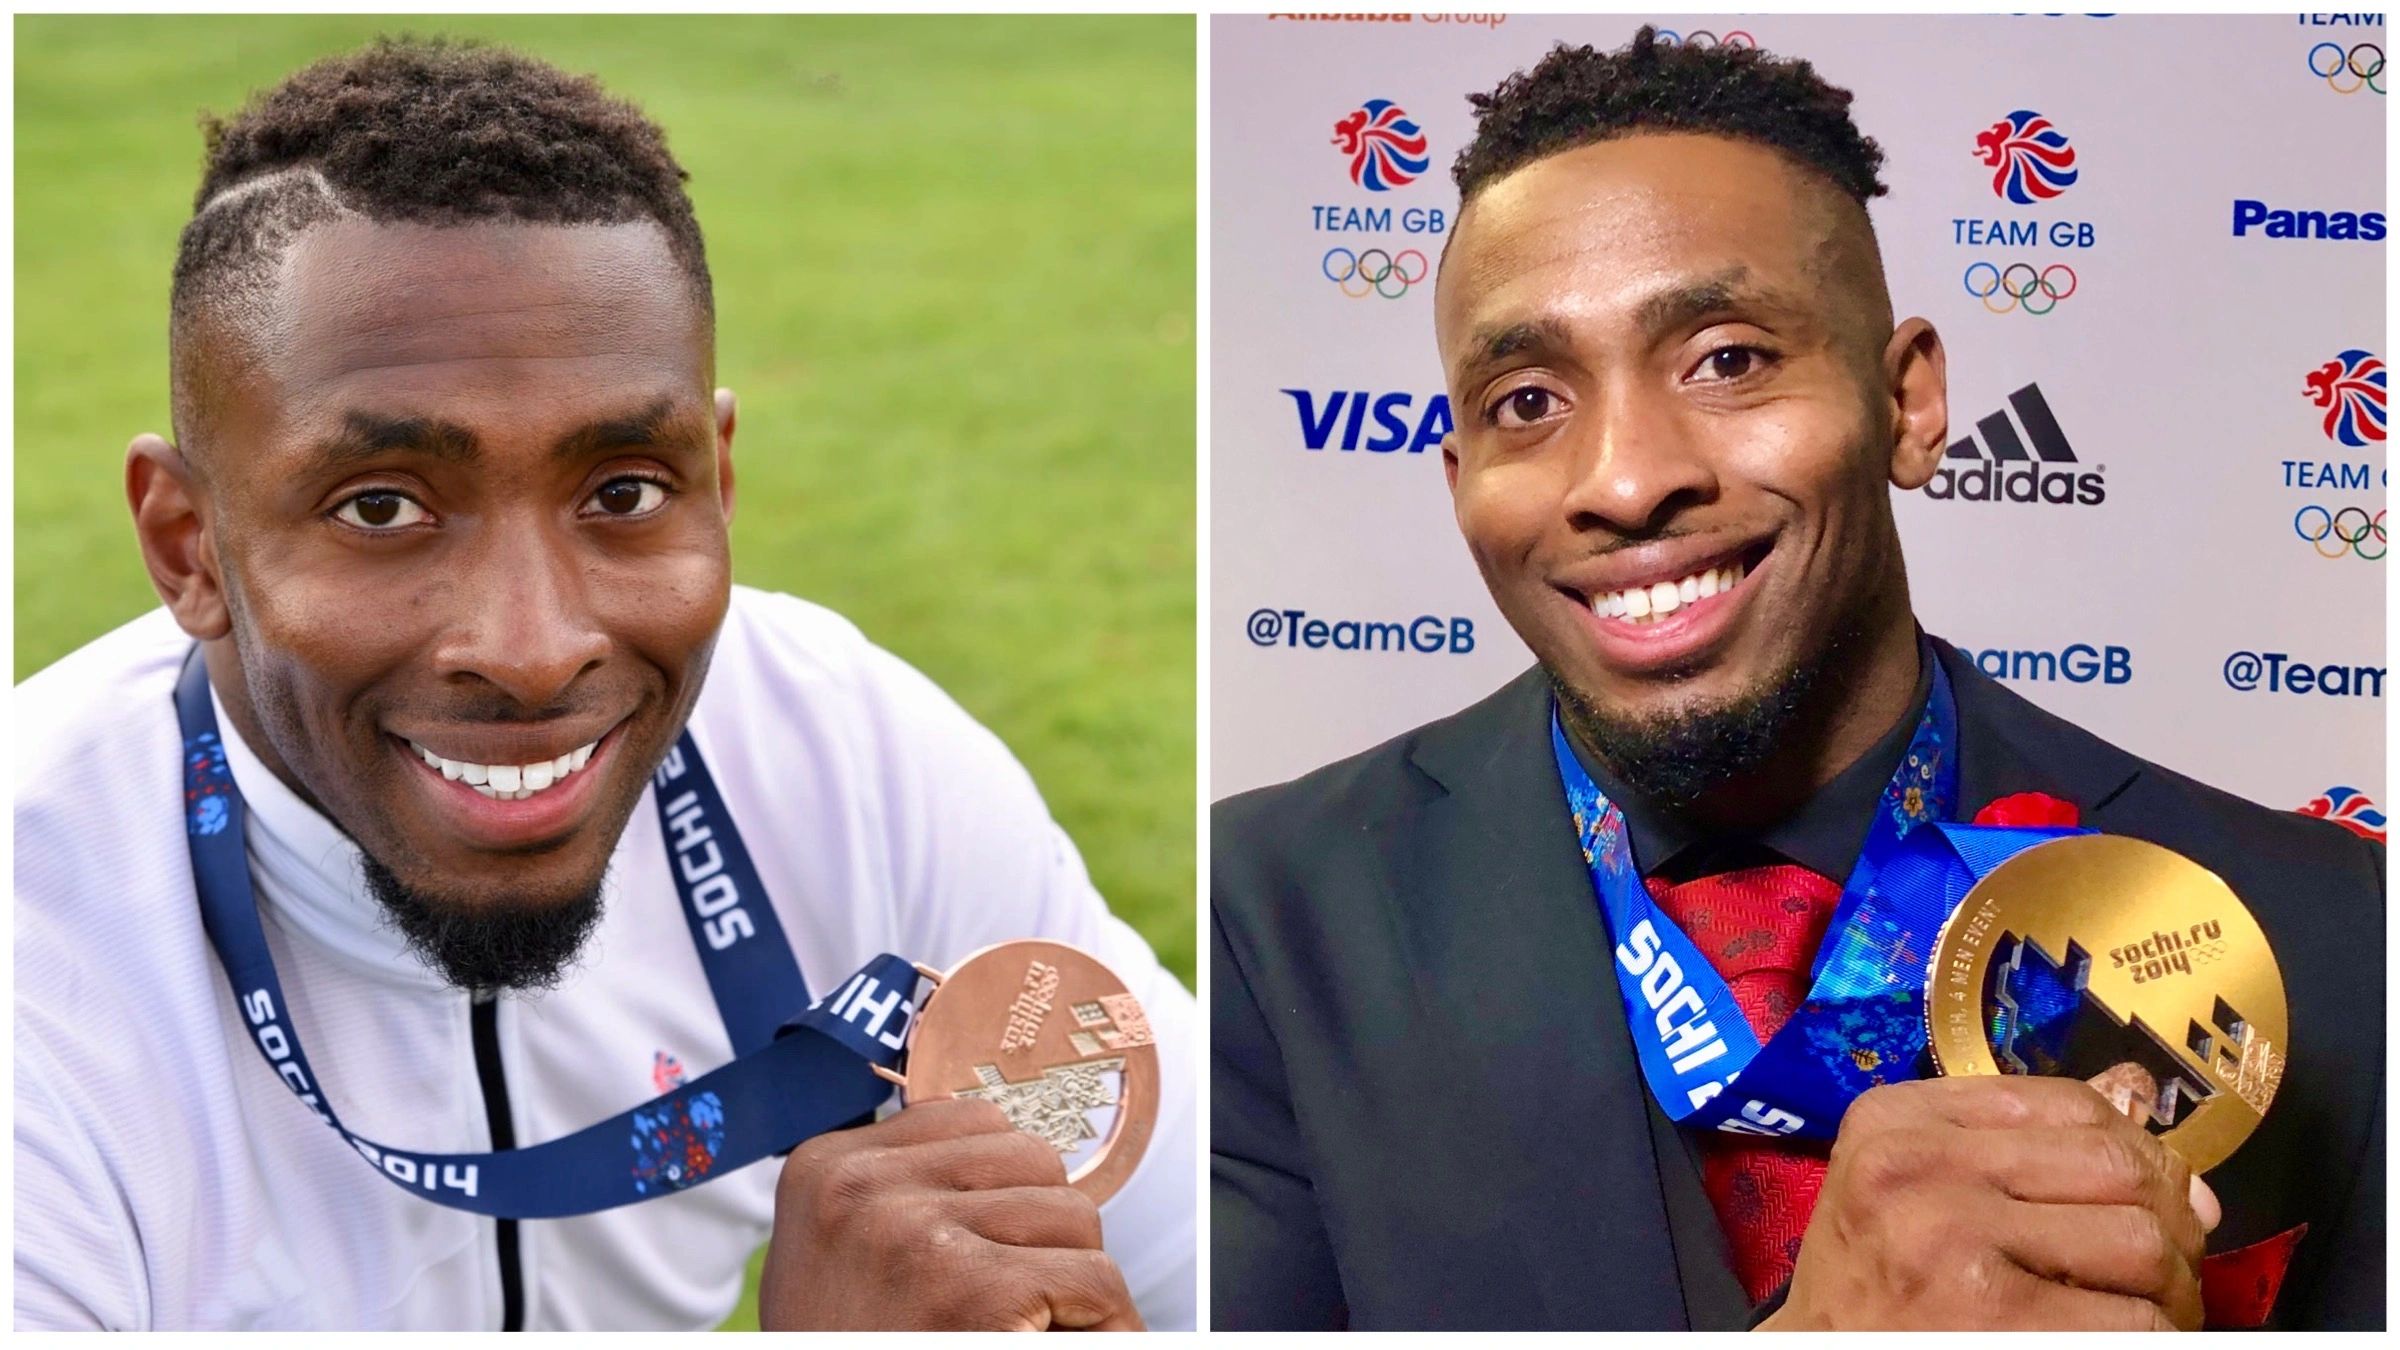 GB's Joel Fearon: sliding for the Swiss & a fake Olympic medal